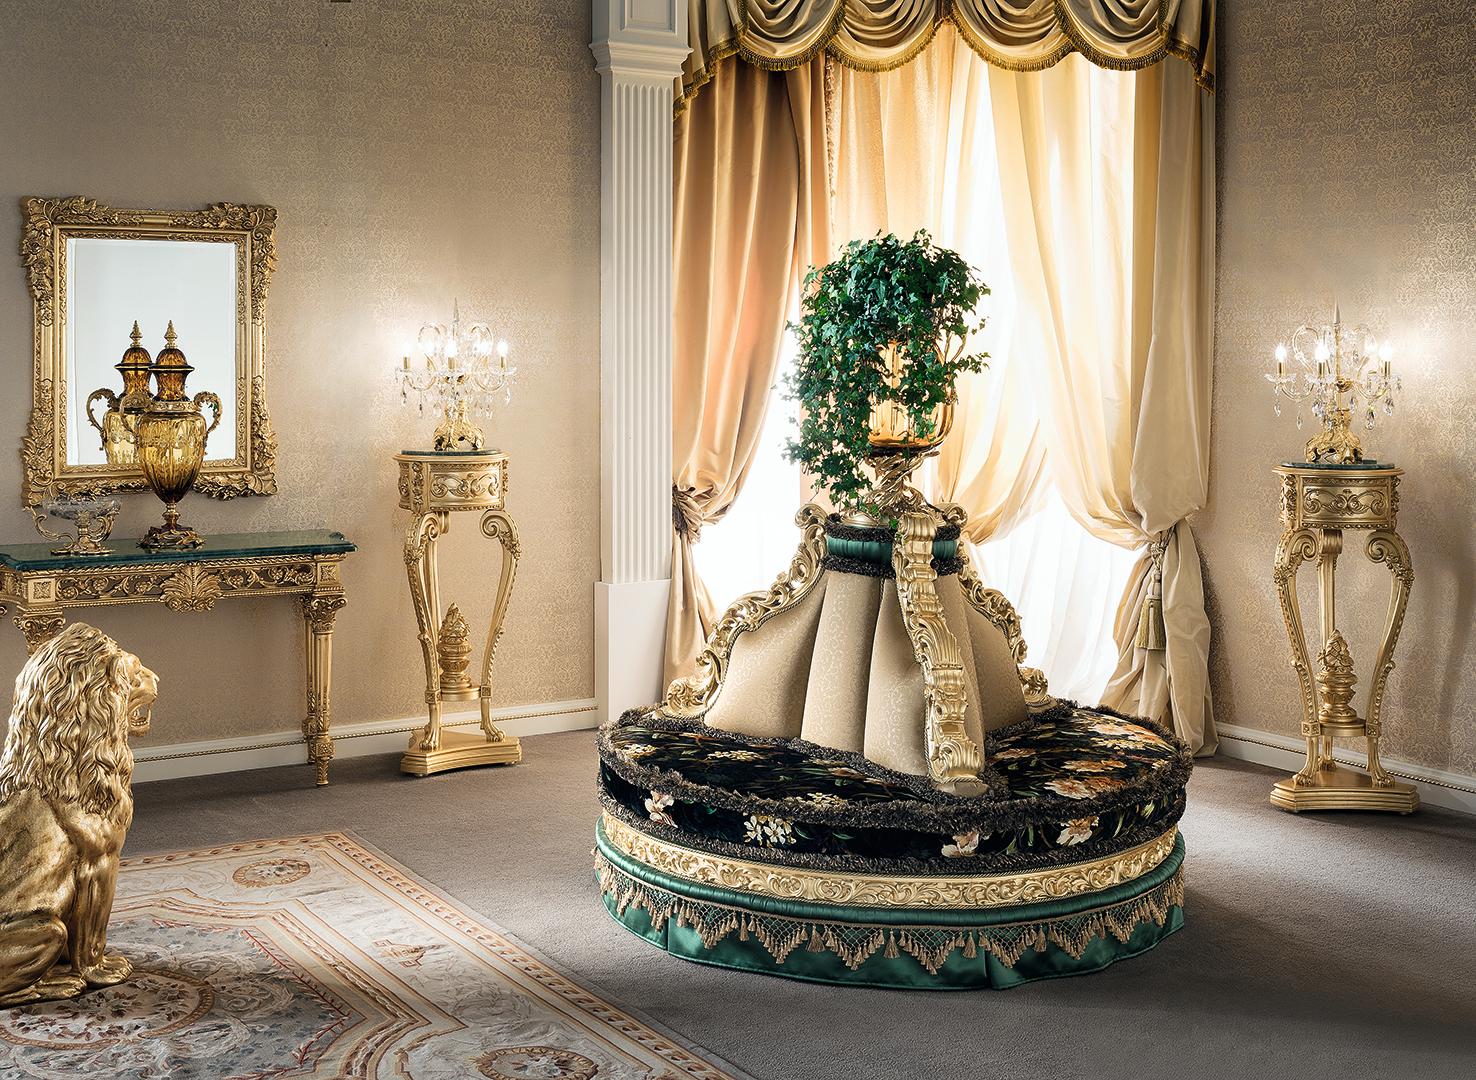 Astonishing Made in Italy console fully decorated with gold leaf finish and a Guatemala green marble top. The precious hand-made carvings, which Modenese artisans developed through centuries, make this item eligible for royal palaces and elegant